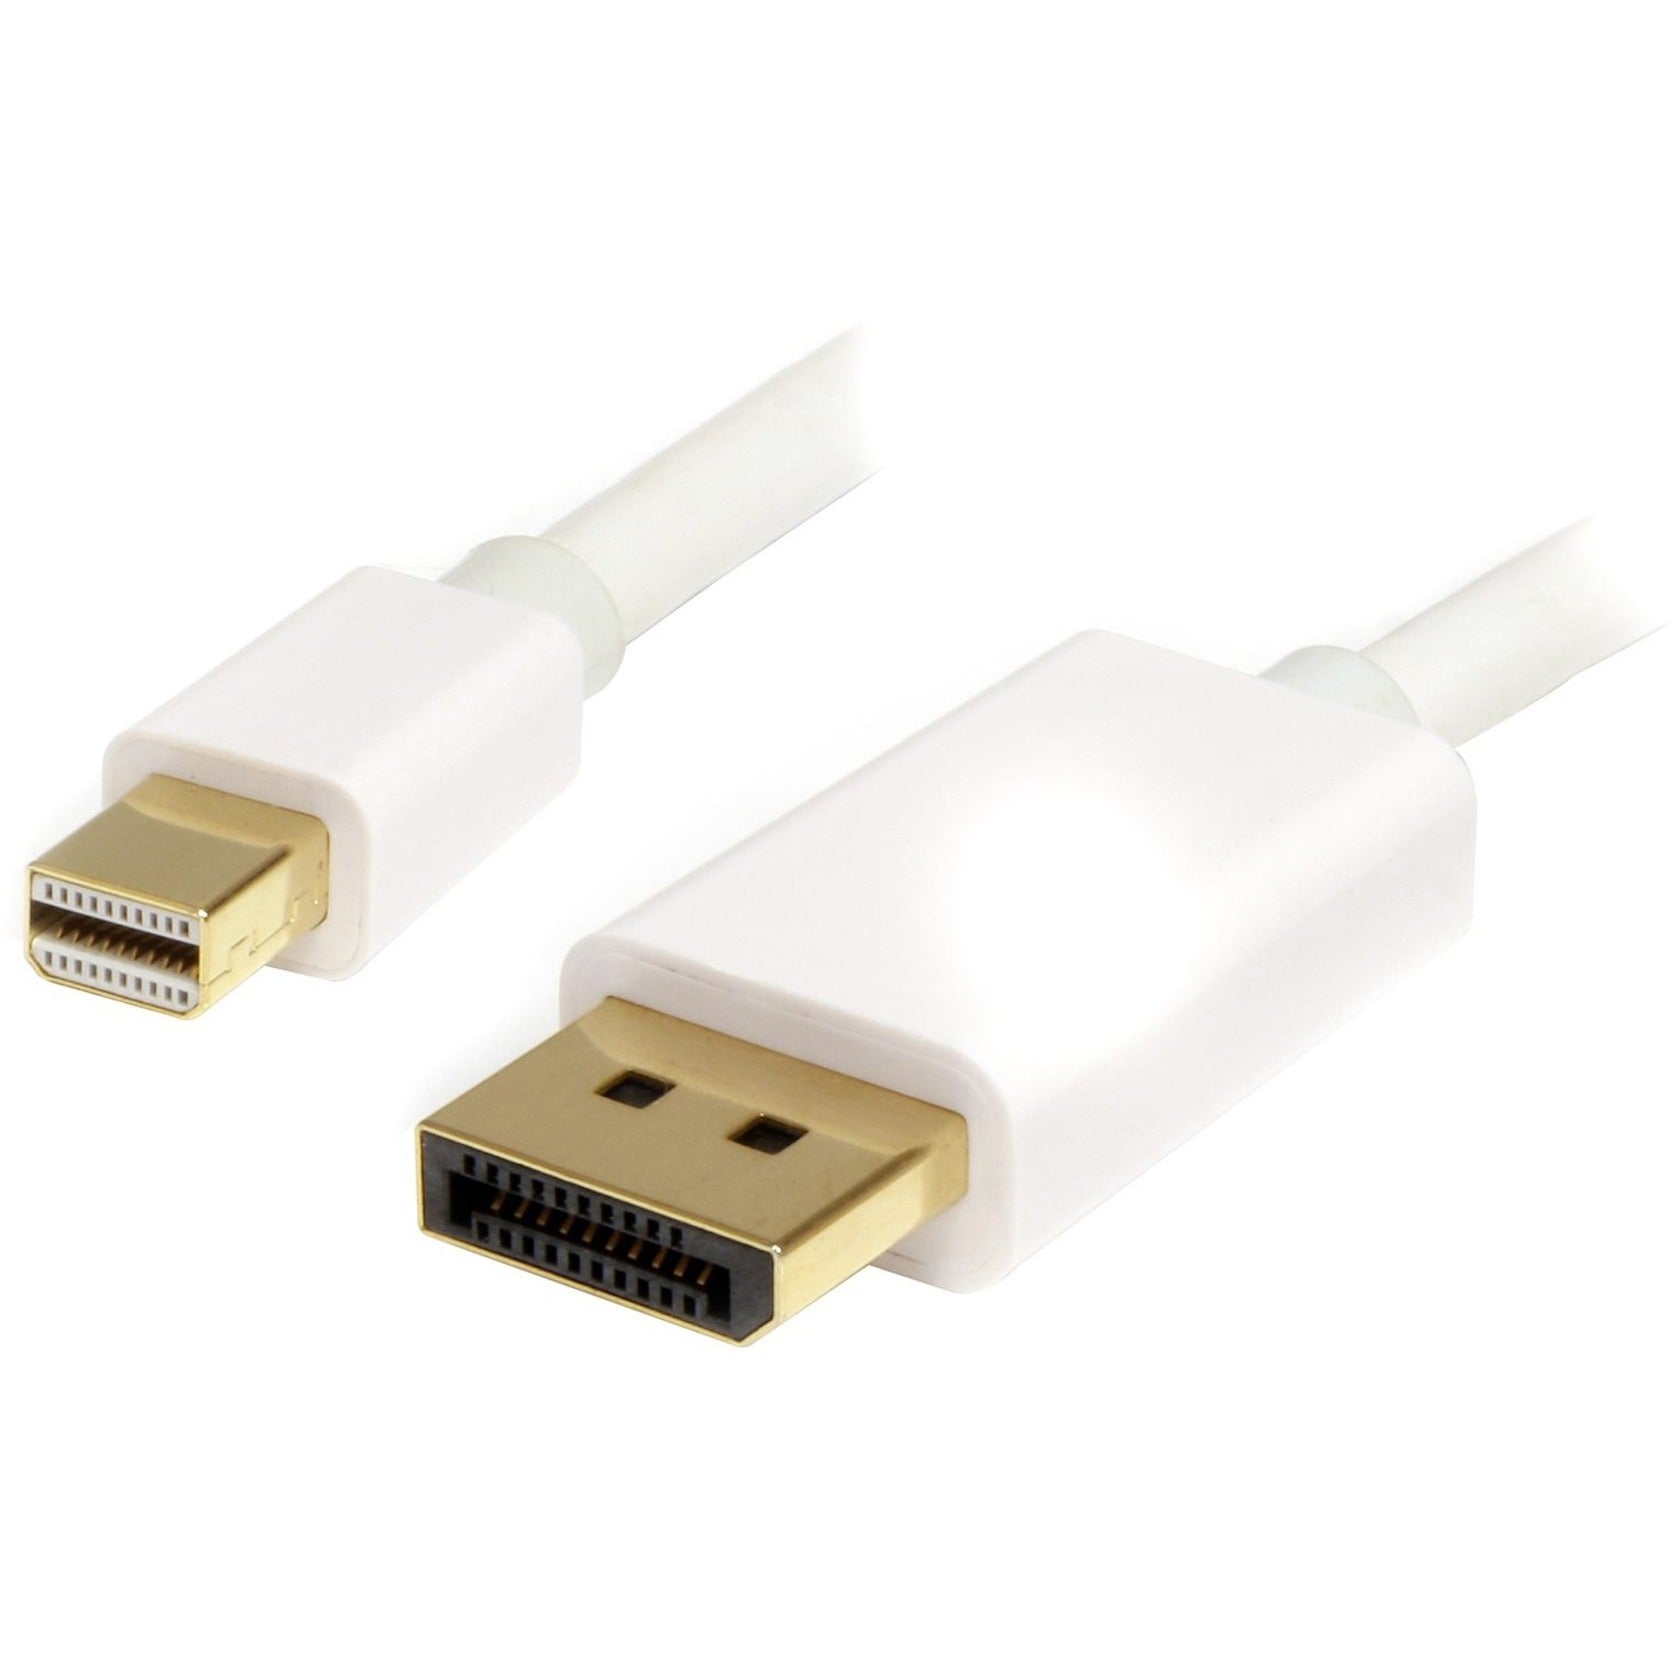 StarTech.com MDP2DPMM2MW 2 m White Mini DisplayPort to DisplayPort 1.2 Adapter Cable - M/M, Cost-effective solution for adding a standard DisplayPort connection to your Laptop or Mac Mini